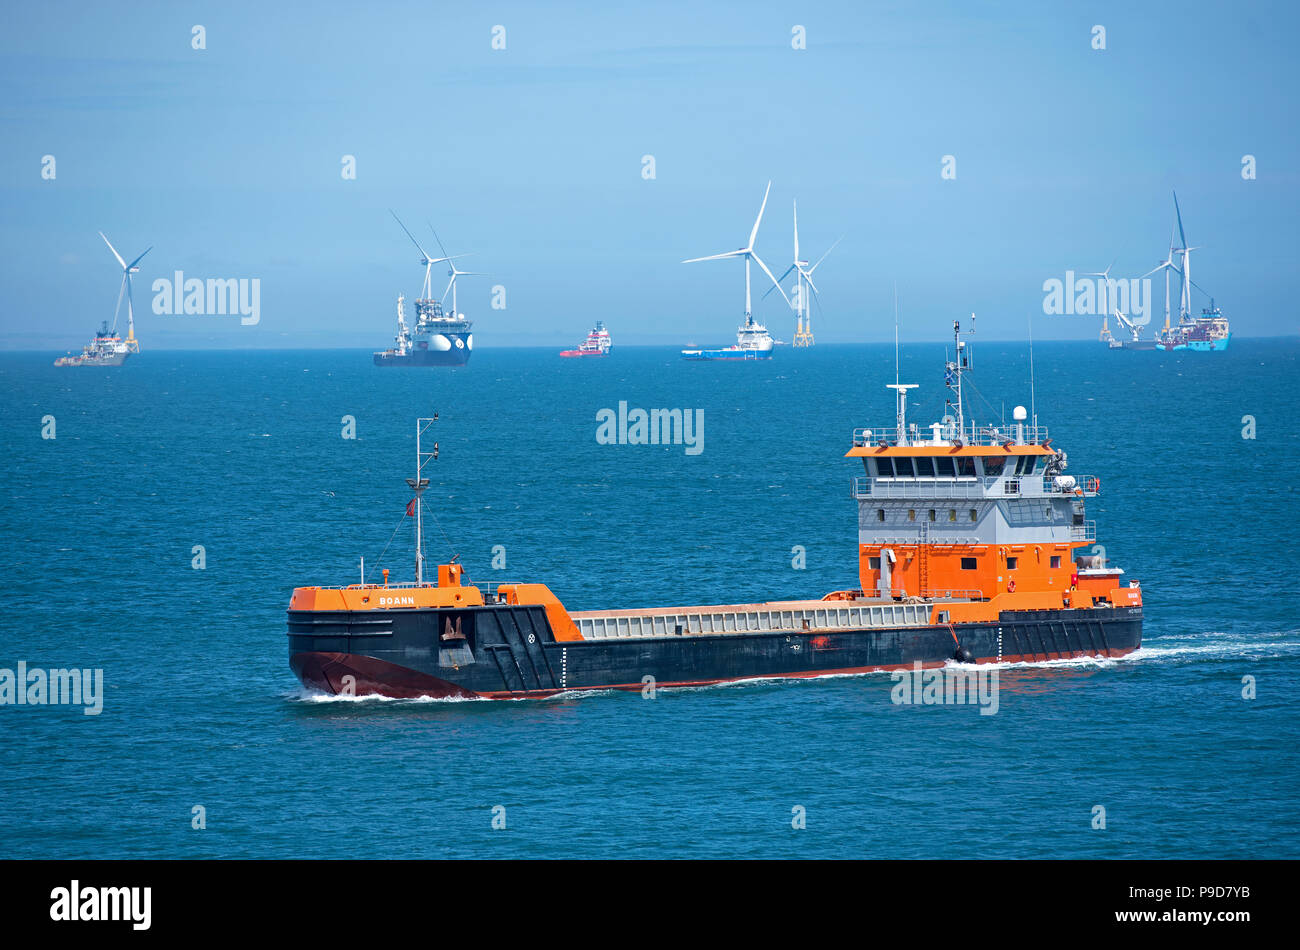 The Motor hopper vessel operating on the new harbour on the South side of Greyhope lighthouse near Aberdeen city, Scotland. Grampian Region. United Ki. Stock Photo